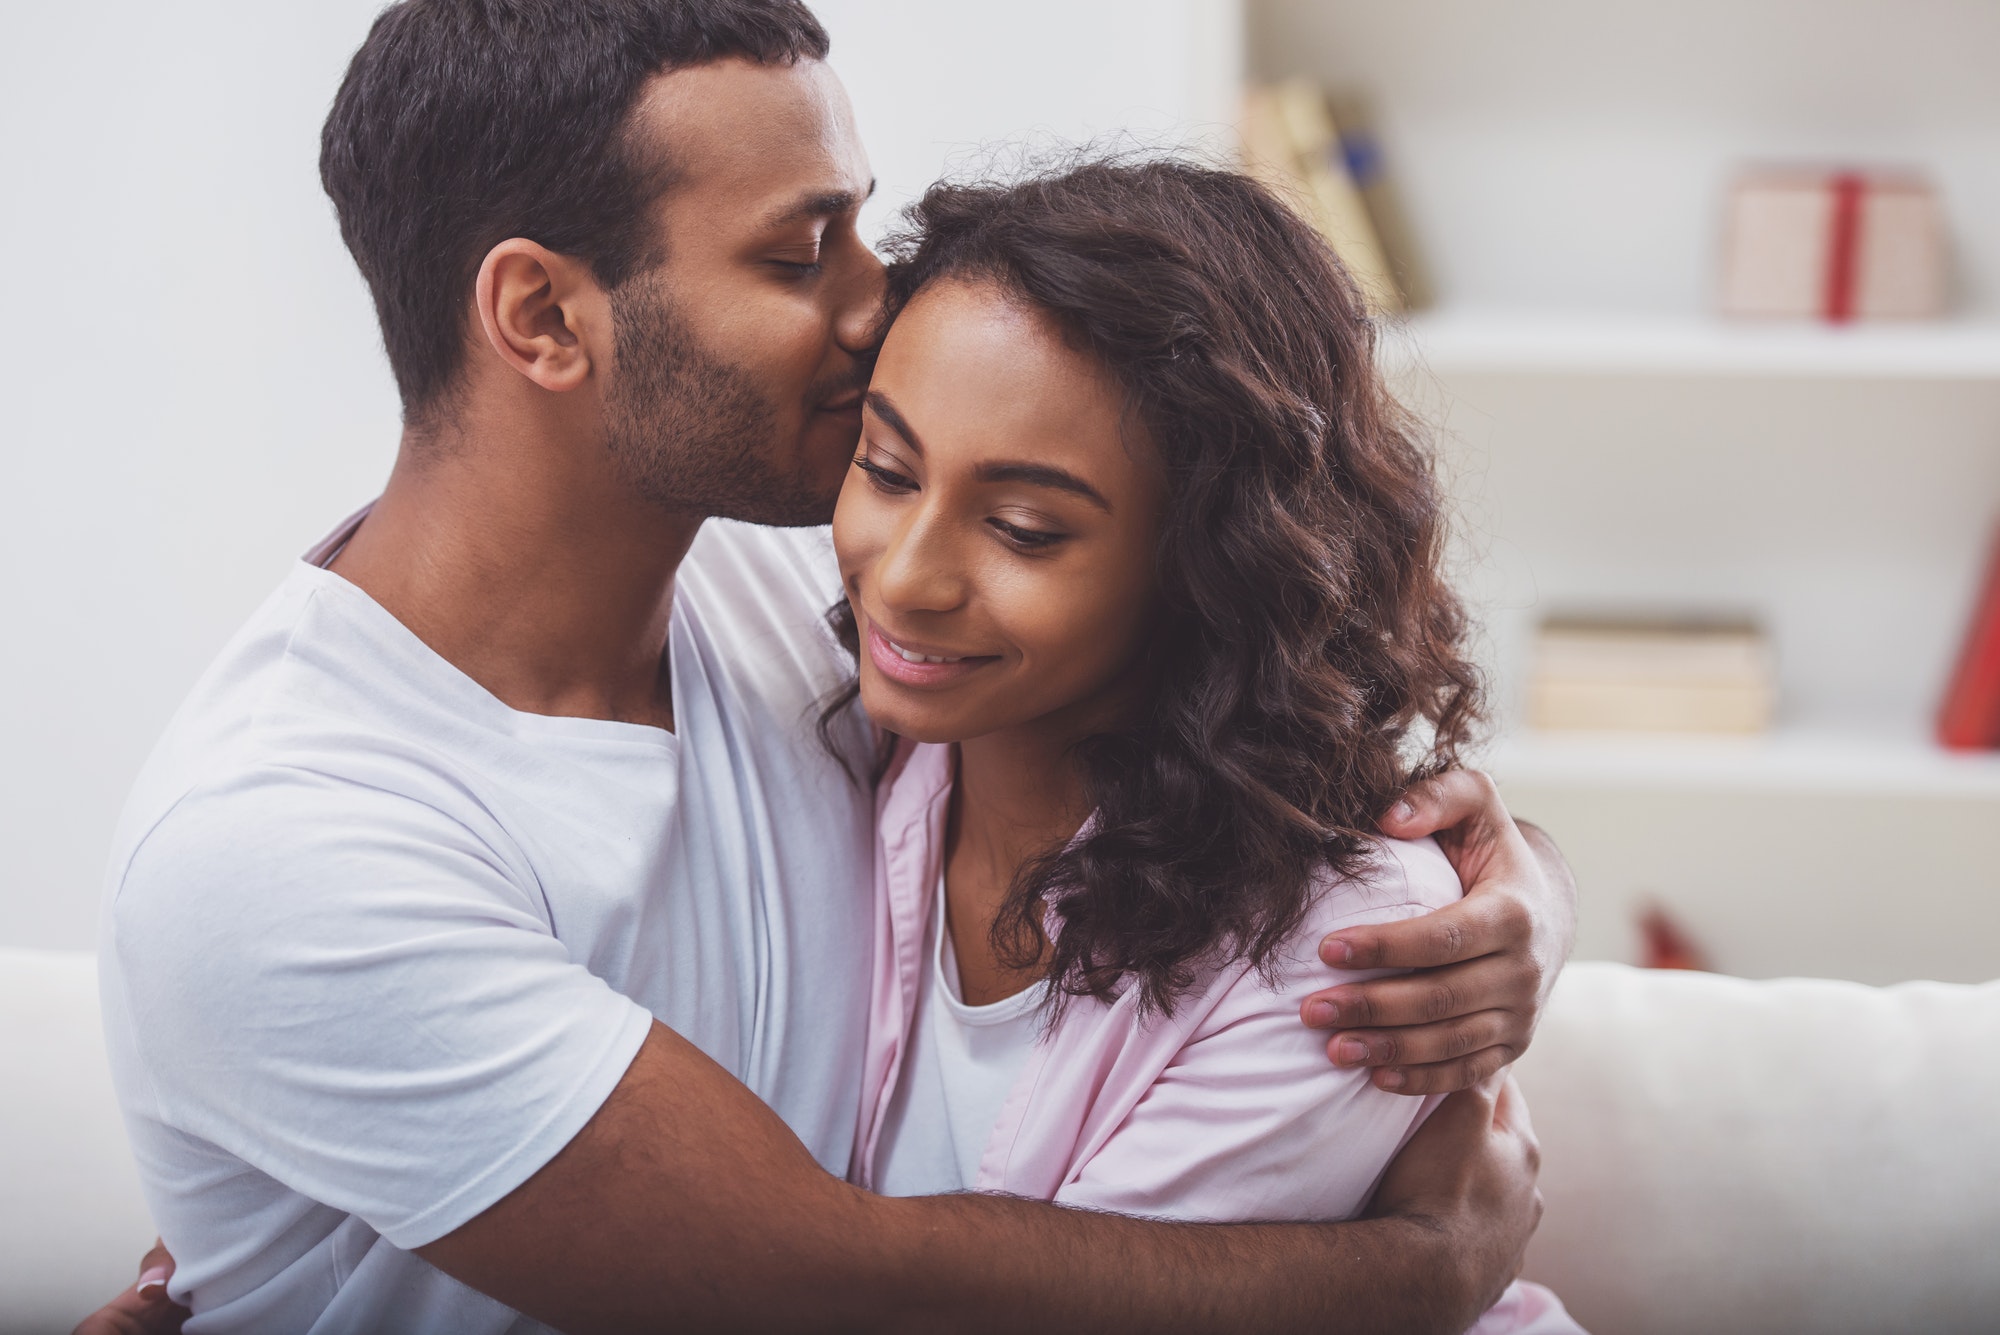 Building Trust and Intimacy Through Relationship Therapy